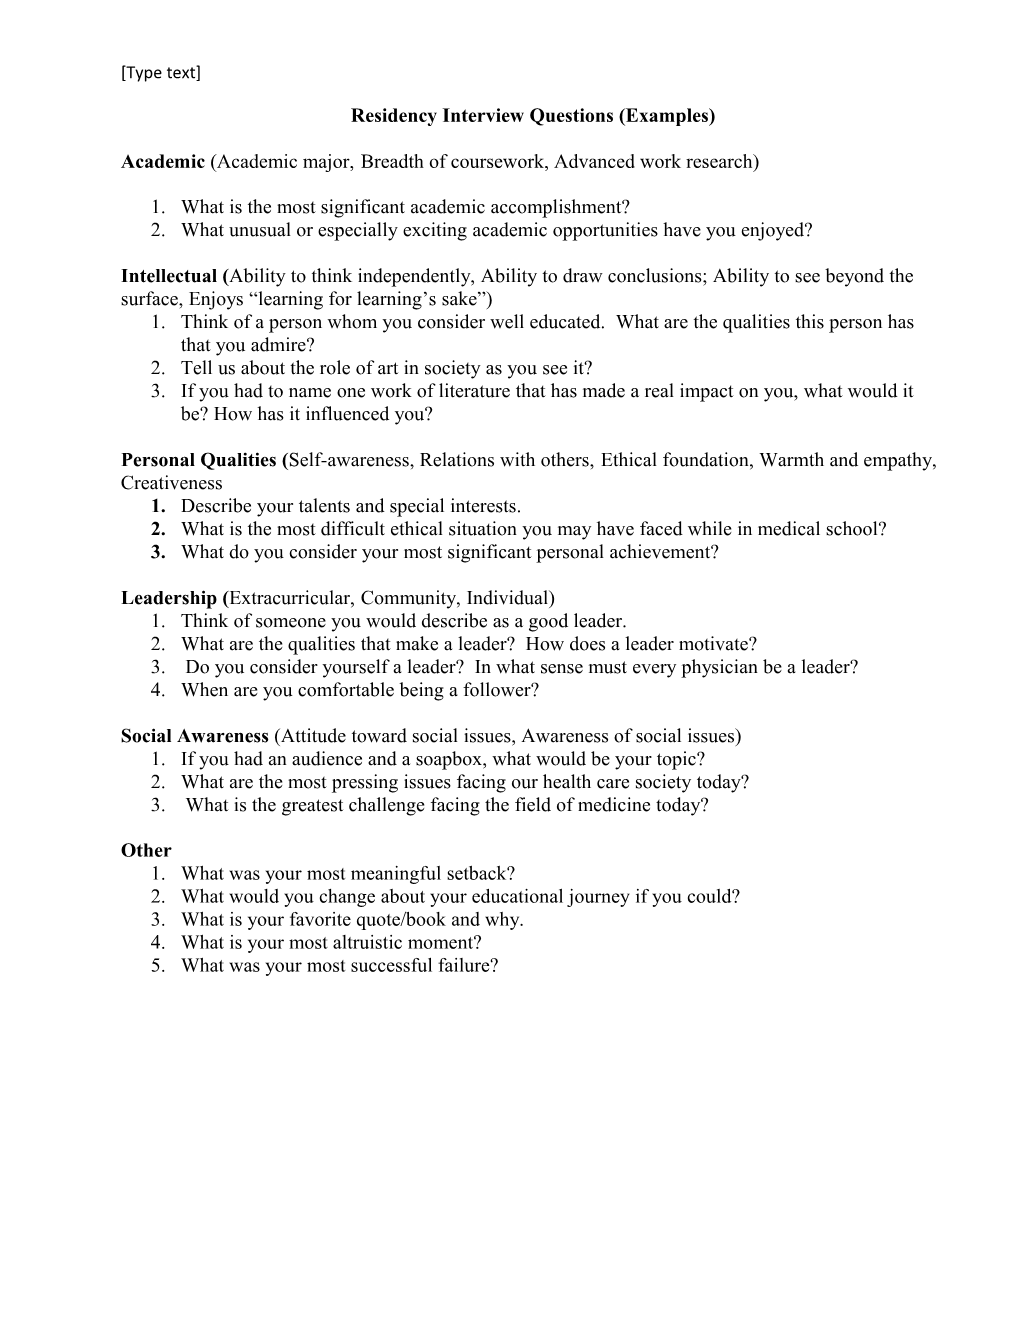 Residency Interview Questions (Examples)